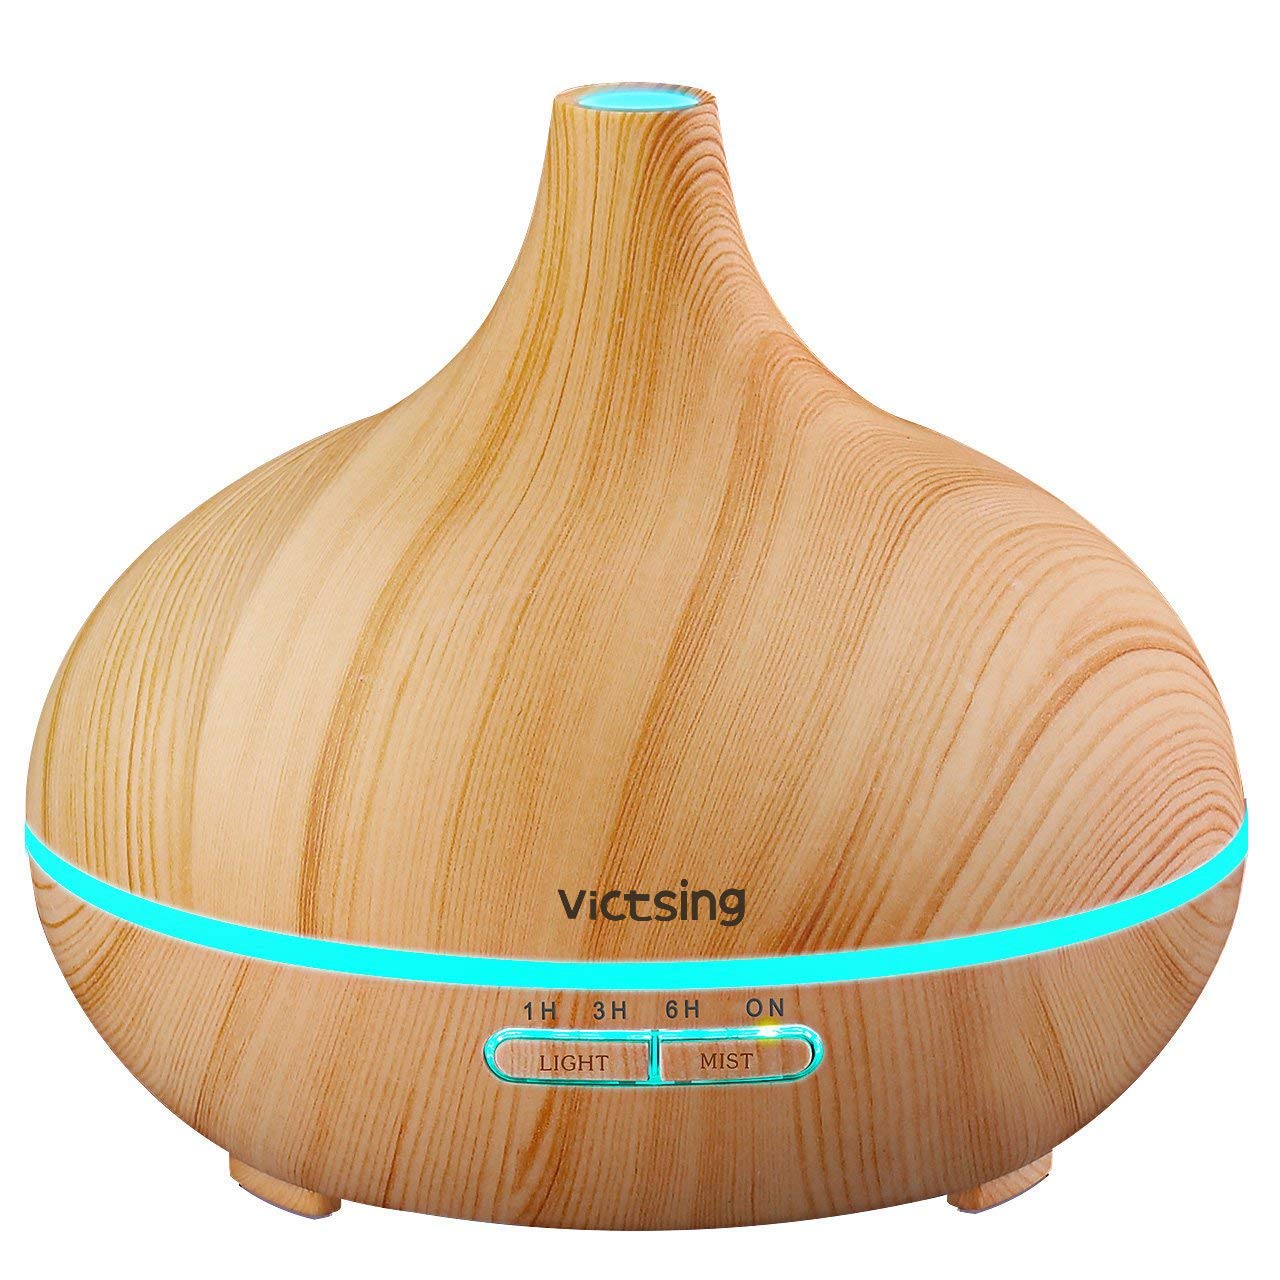 VicTsing Essential Oil Diffuser & Cool Mist Humidifier